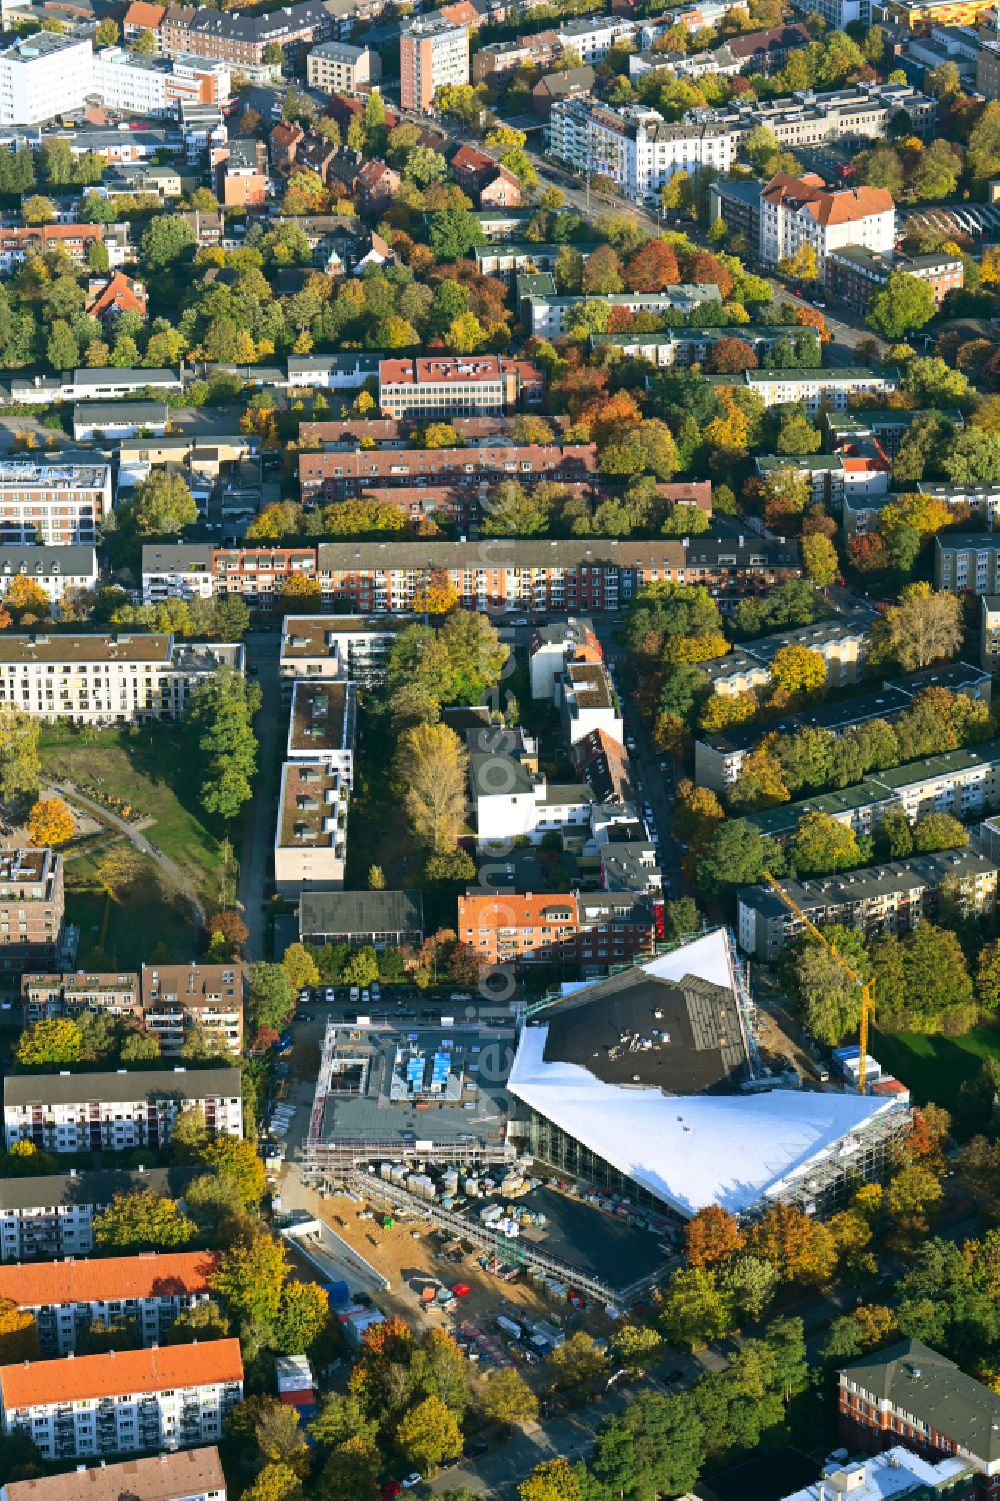 Hamburg from above - Construction site for modernization, renovation and conversion of the indoor swimming pool Alster-Schwimmhalle on street Ifflandstrasse - Sechslingspforte in the district Hohenfelde in Hamburg, Germany